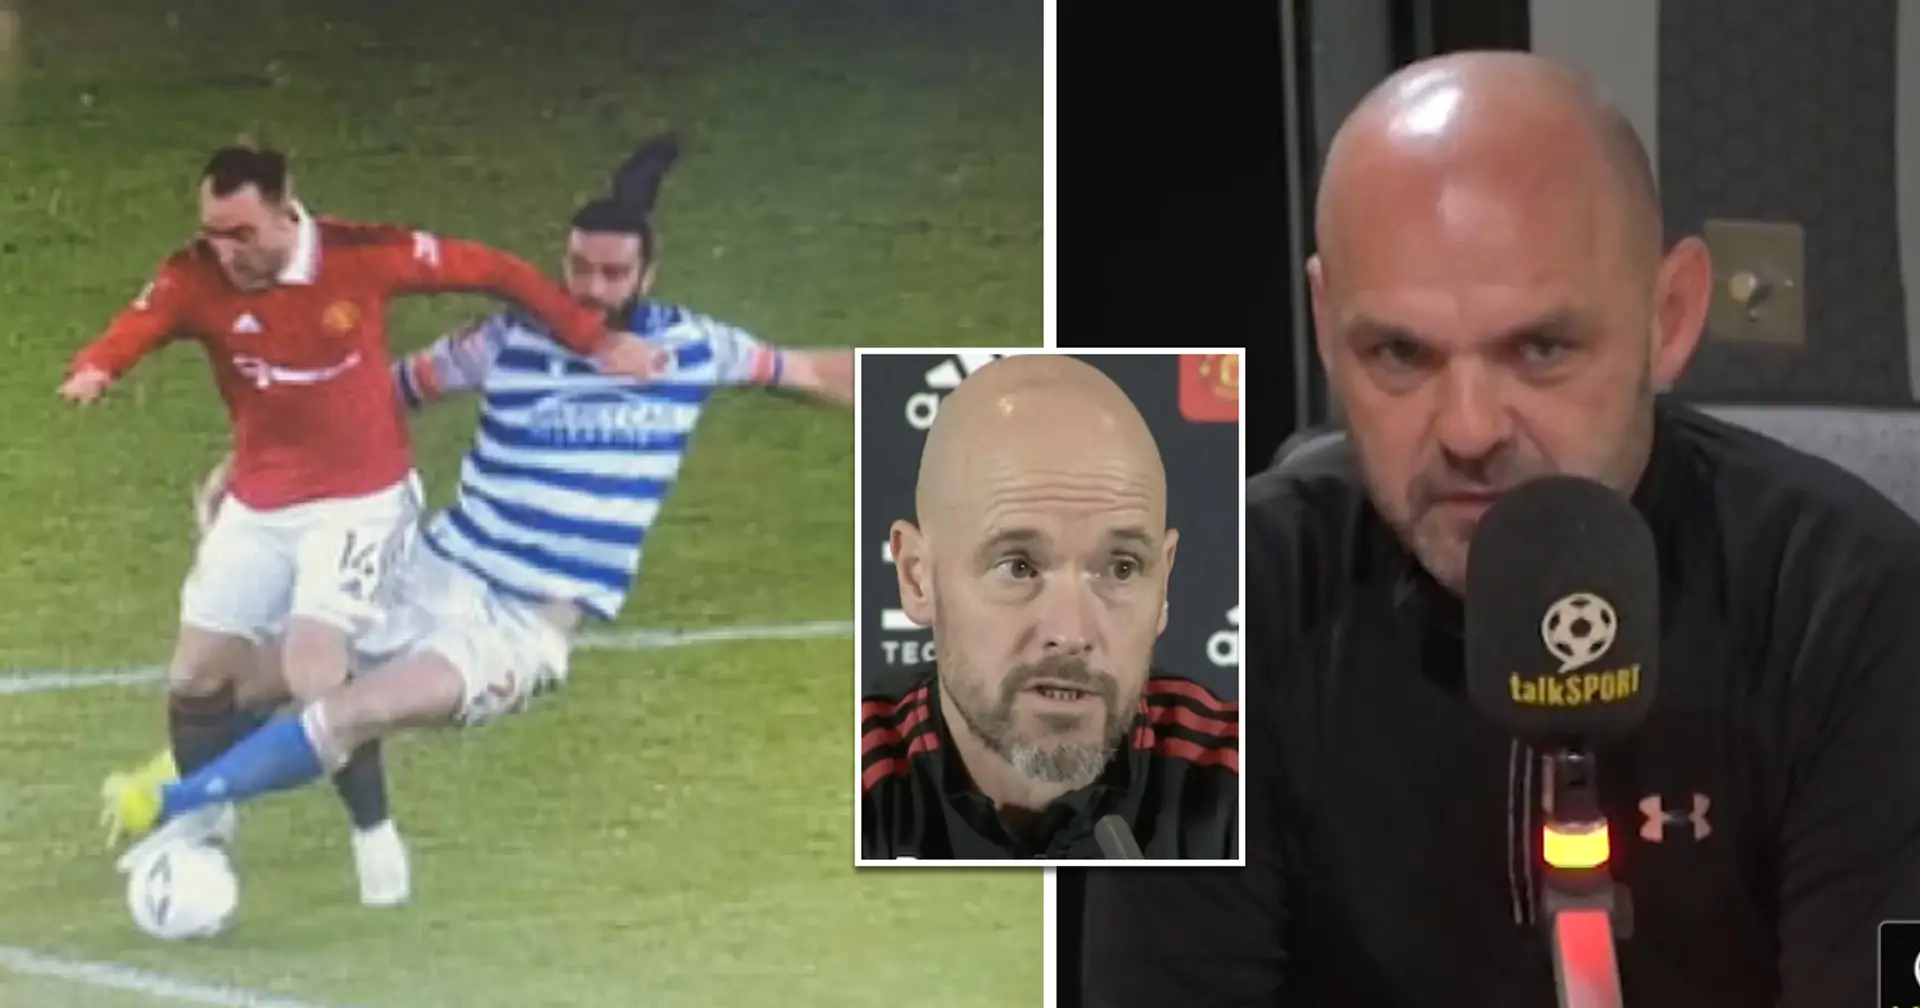 Danny Murphy: 'Ten Hag is whining about Caroll's tackle on Eriksen. Be positive!'